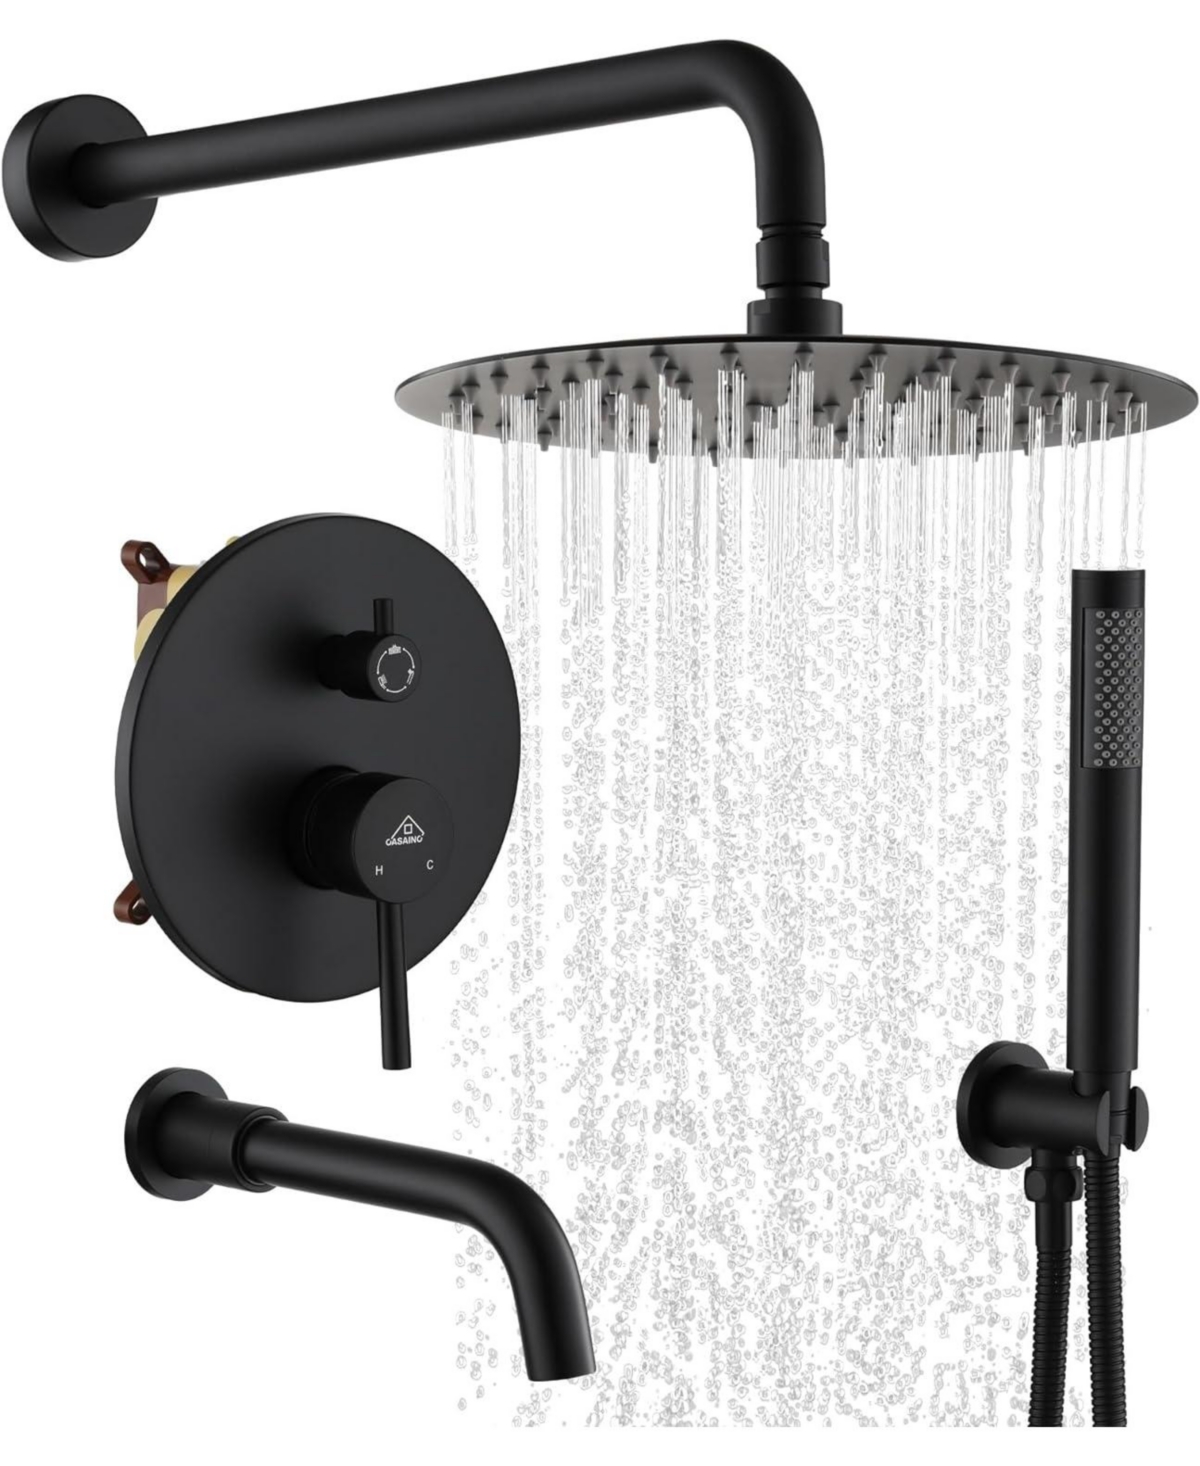 10" Inch Wall Mounted Round Shower System Set with Handheld Spray & Tub Spout - Brushed nickel